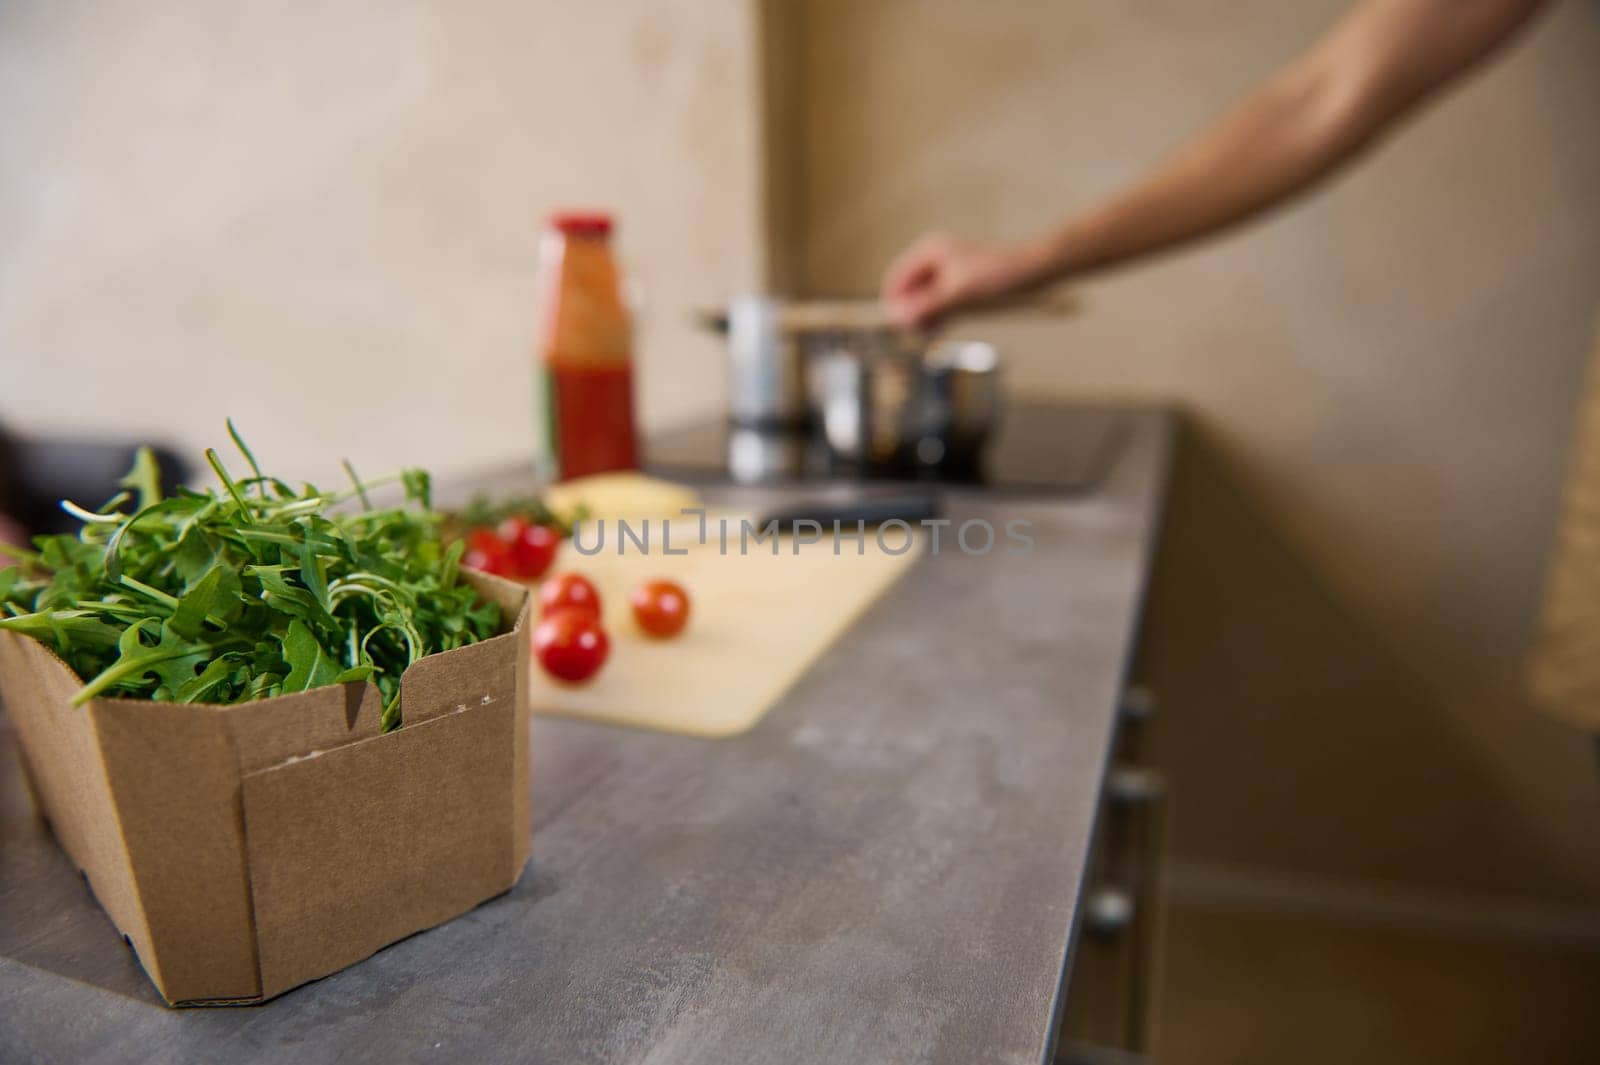 Healthy fresh organic arugula herbs in cardboard box, ingredients and blurred stainless steel pan on electric stove in the home kitchen interior. Healthy ingredients for Mediterranean lunch. Culinary by artgf